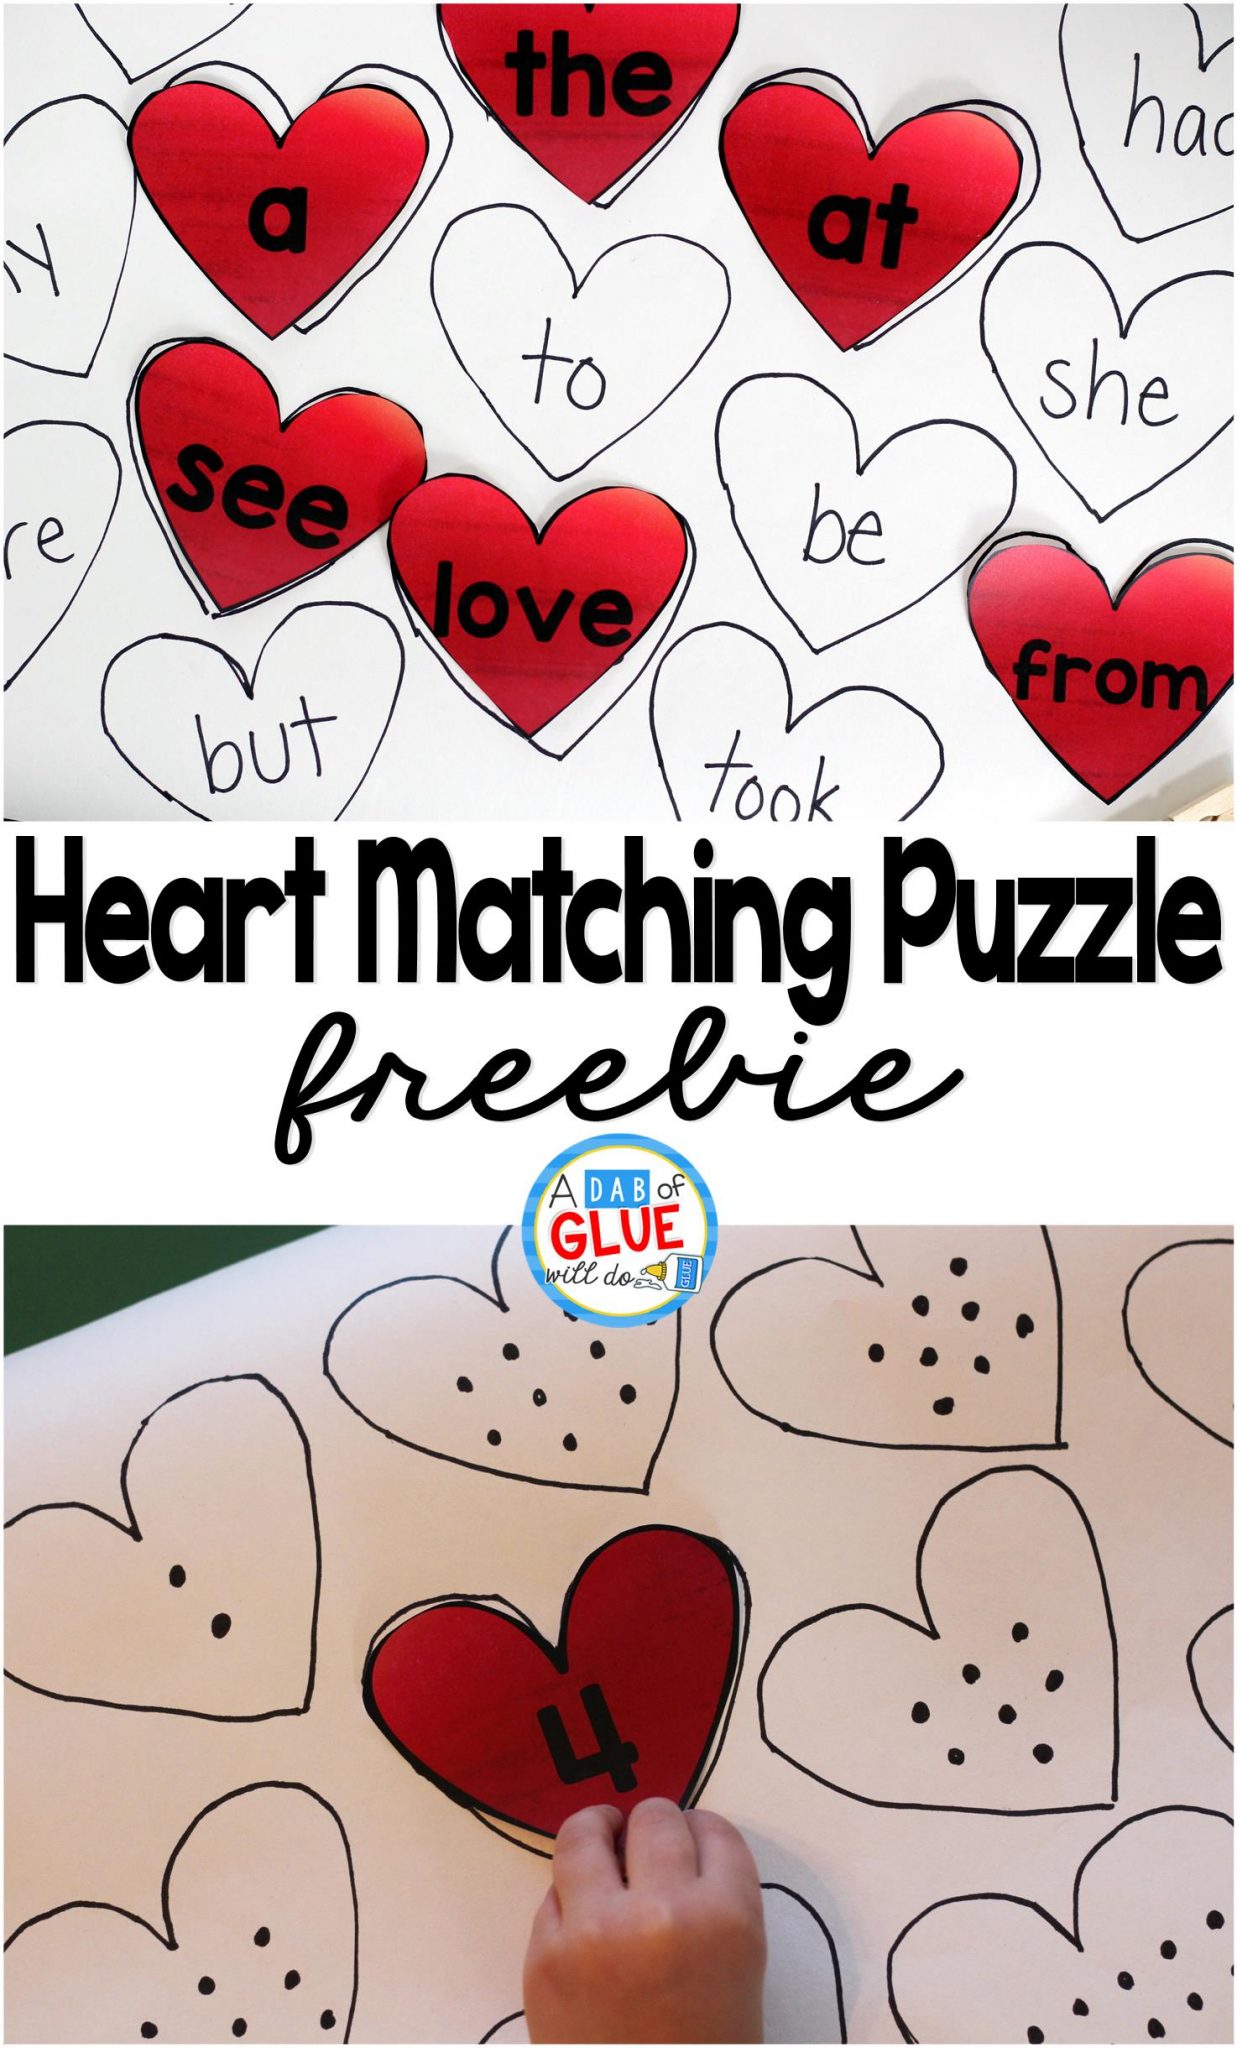 Heart Matching Puzzle